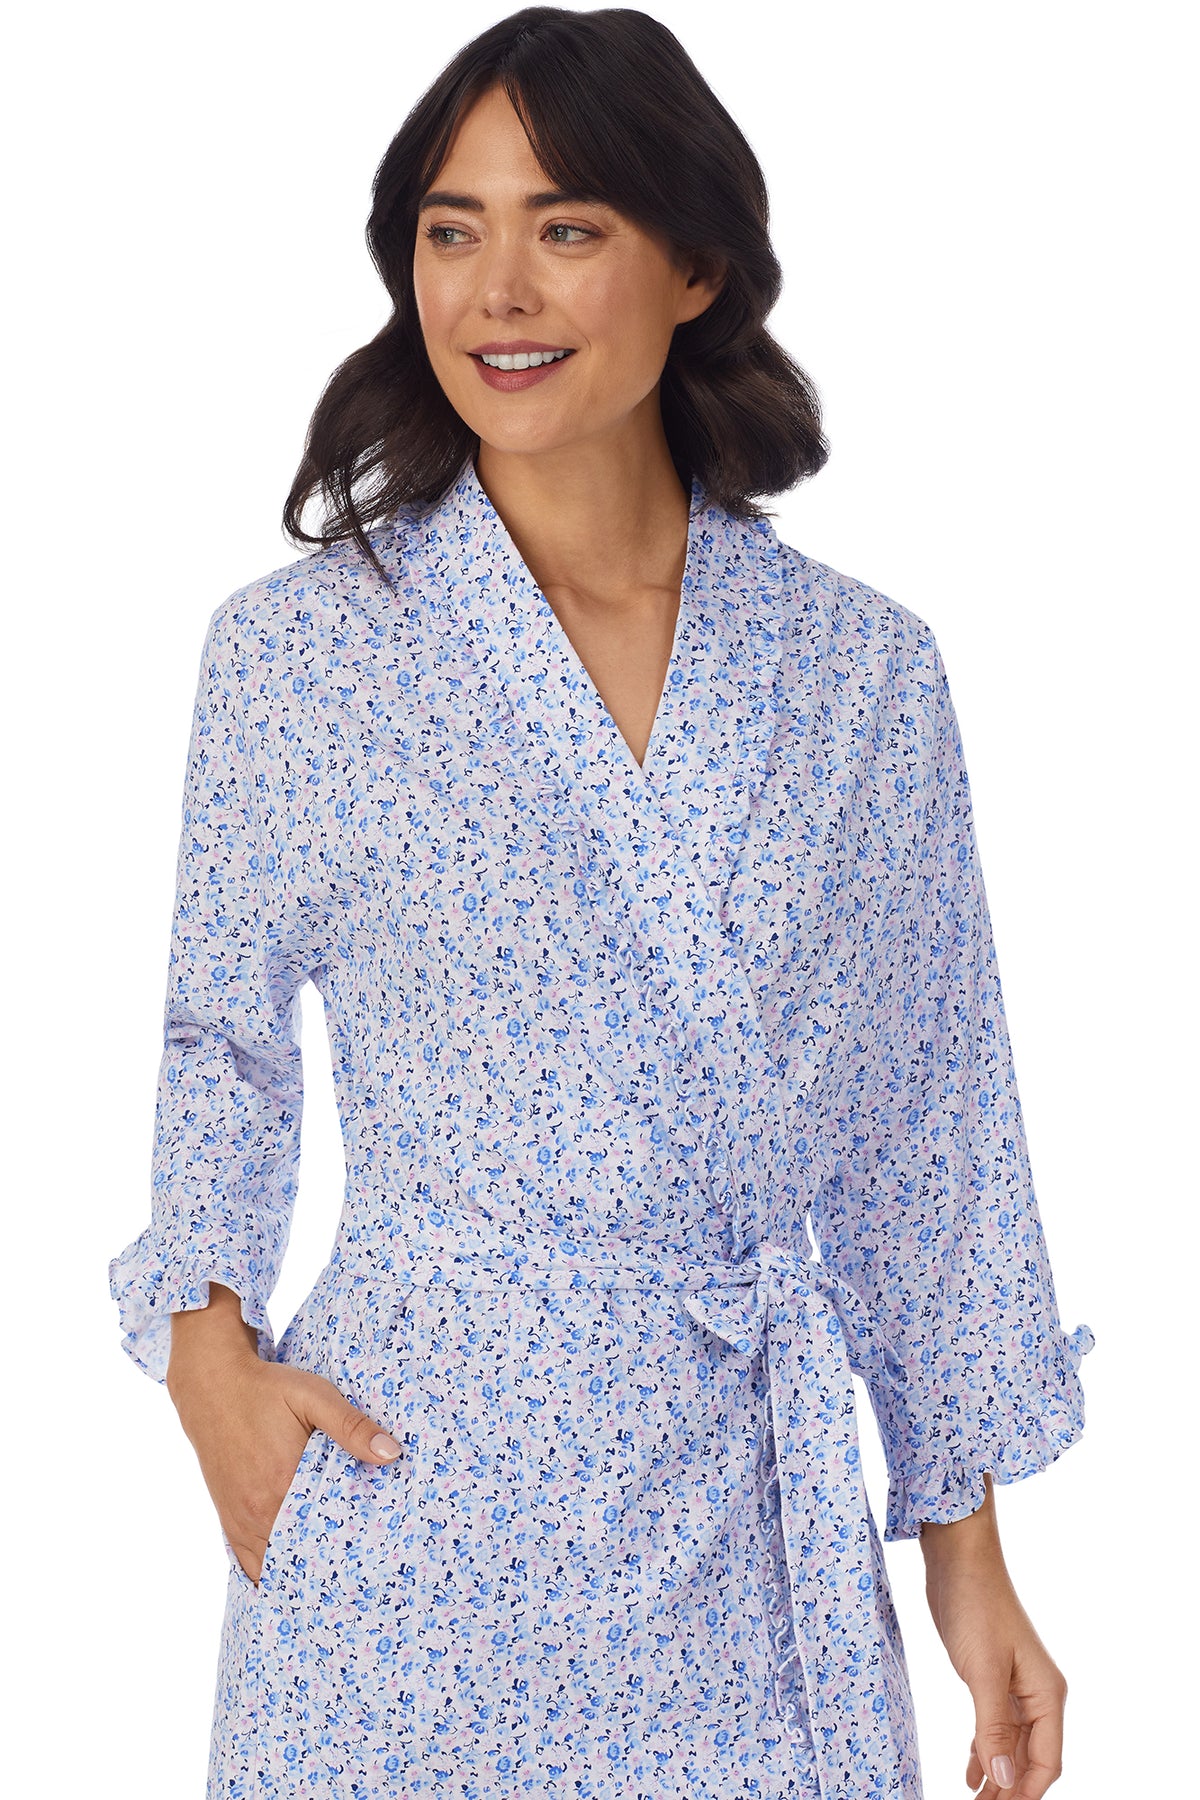 A lady wearing a white long sleeve shortie wrap with blue floral pattern.